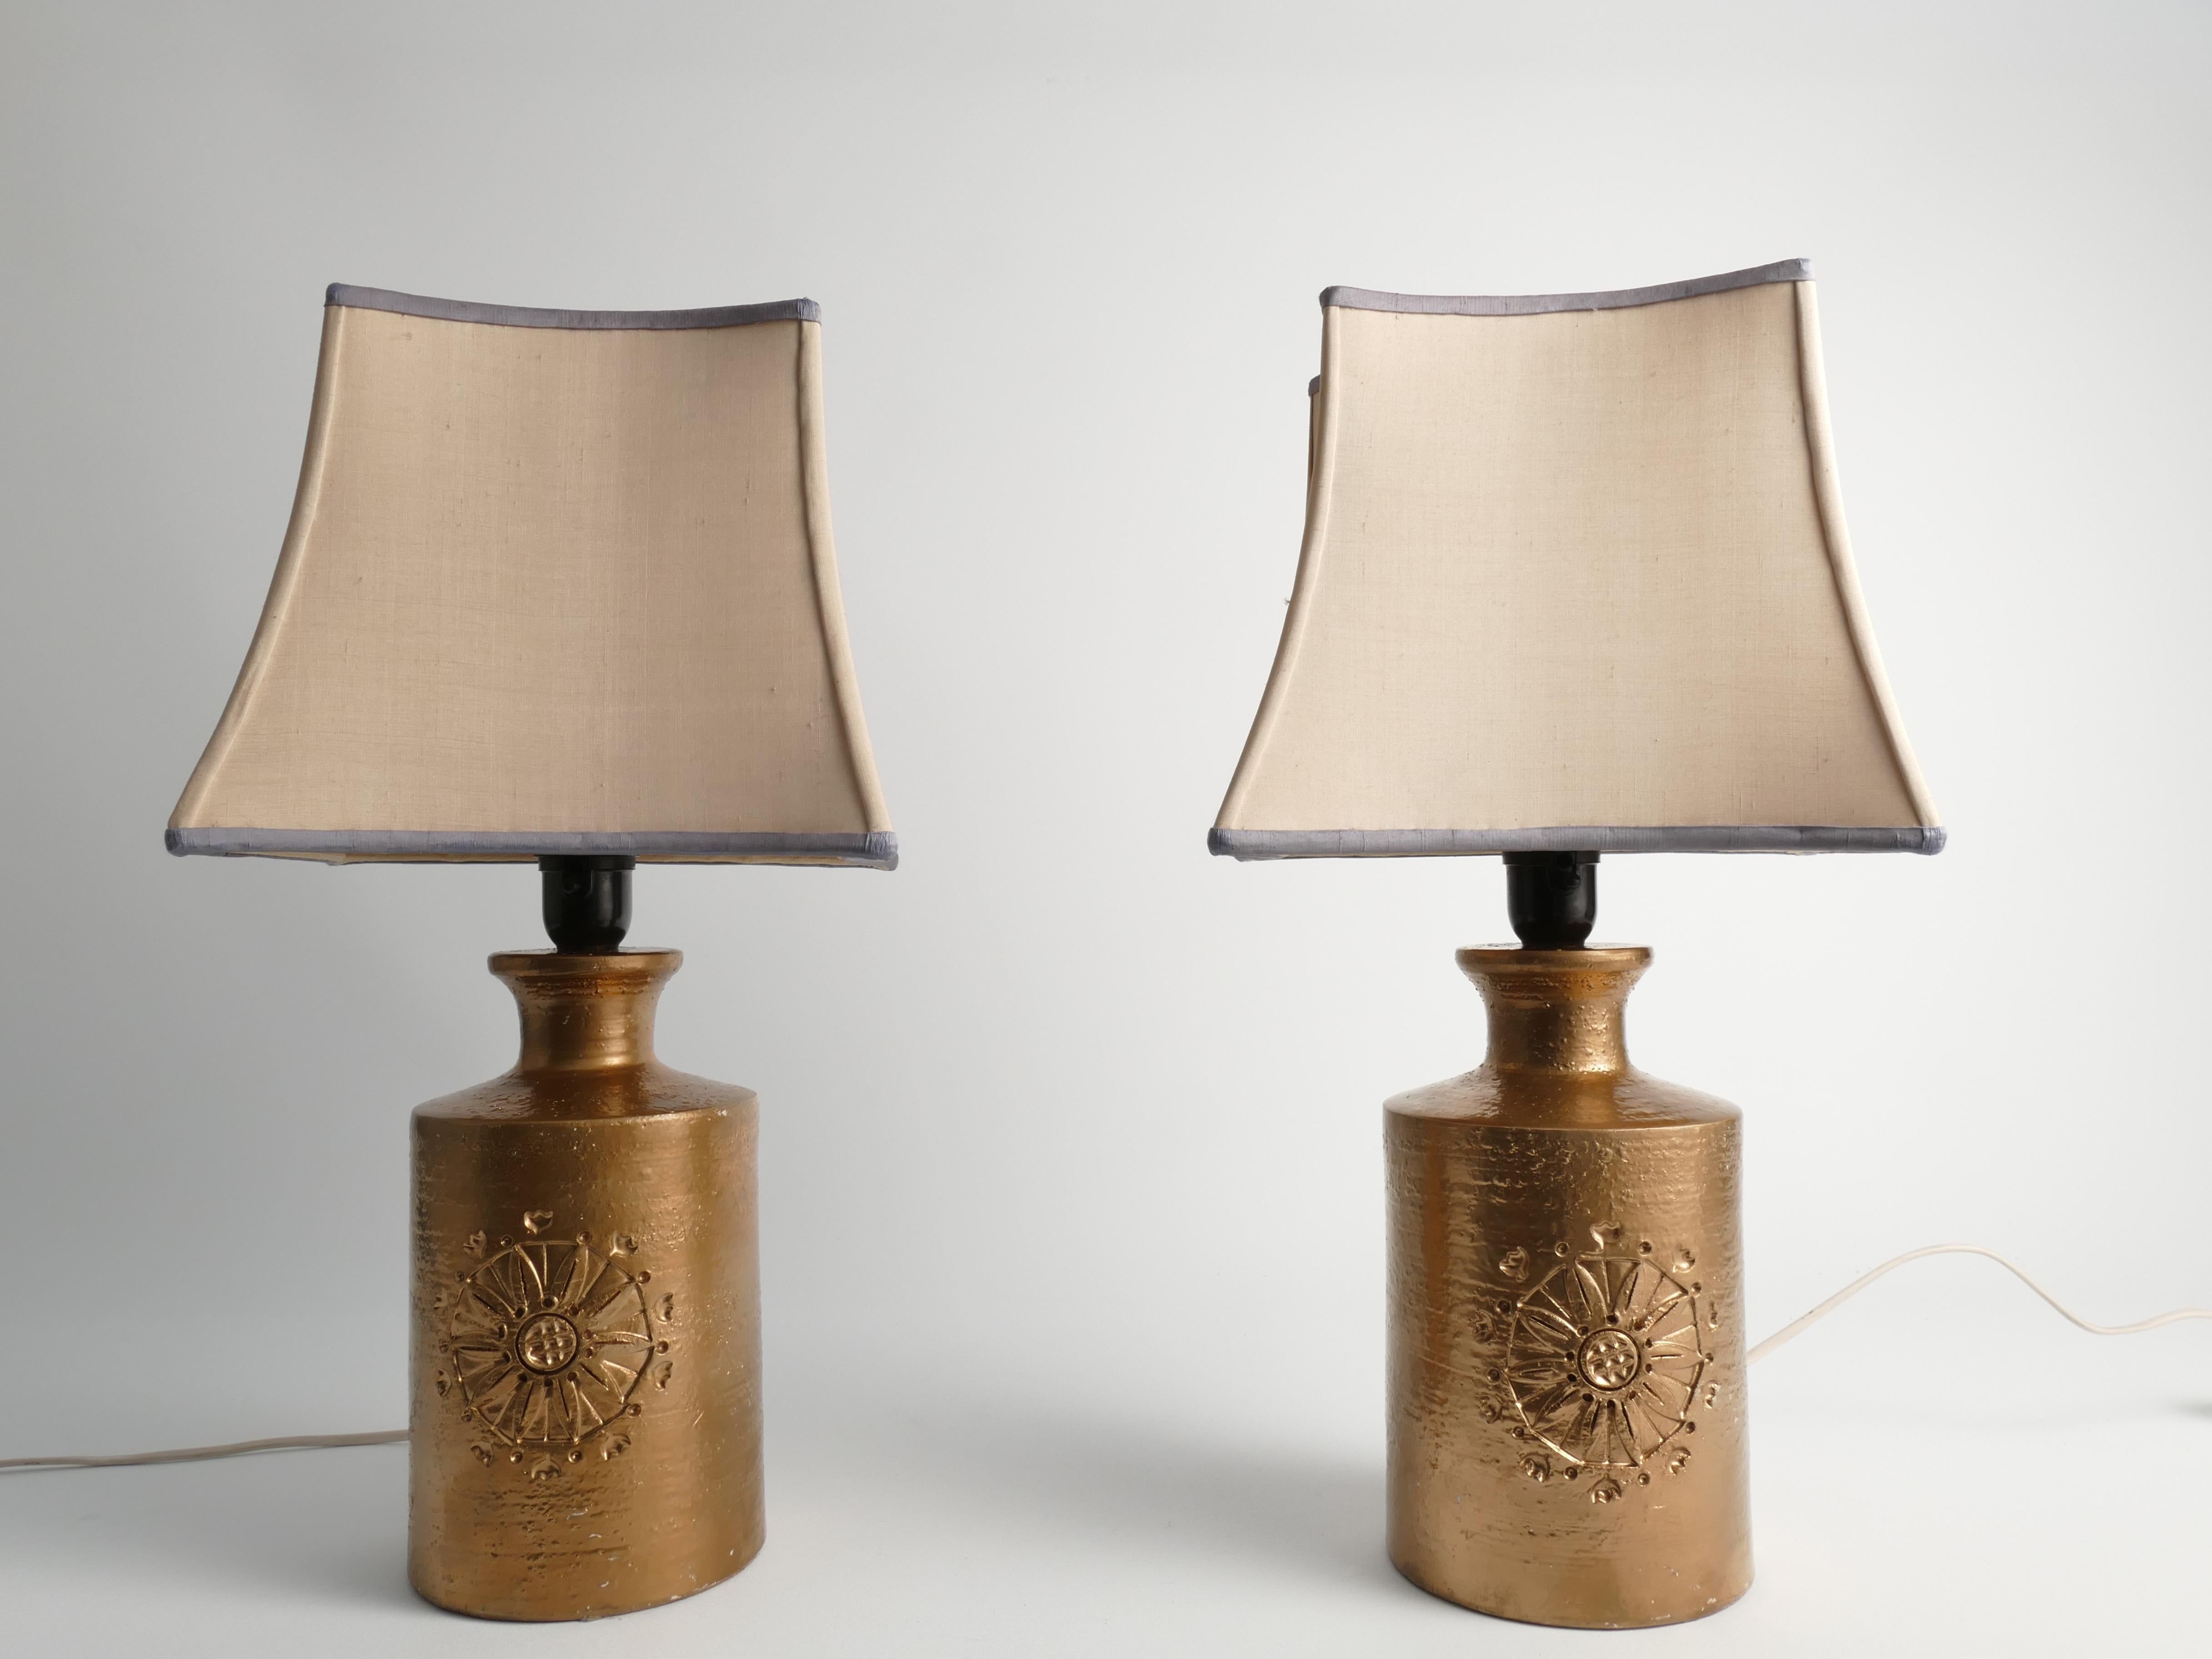 Swedish Gold Glazed Ceramic Table Lamps by Bitossi for Bergboms, Set of 2, 1970's For Sale